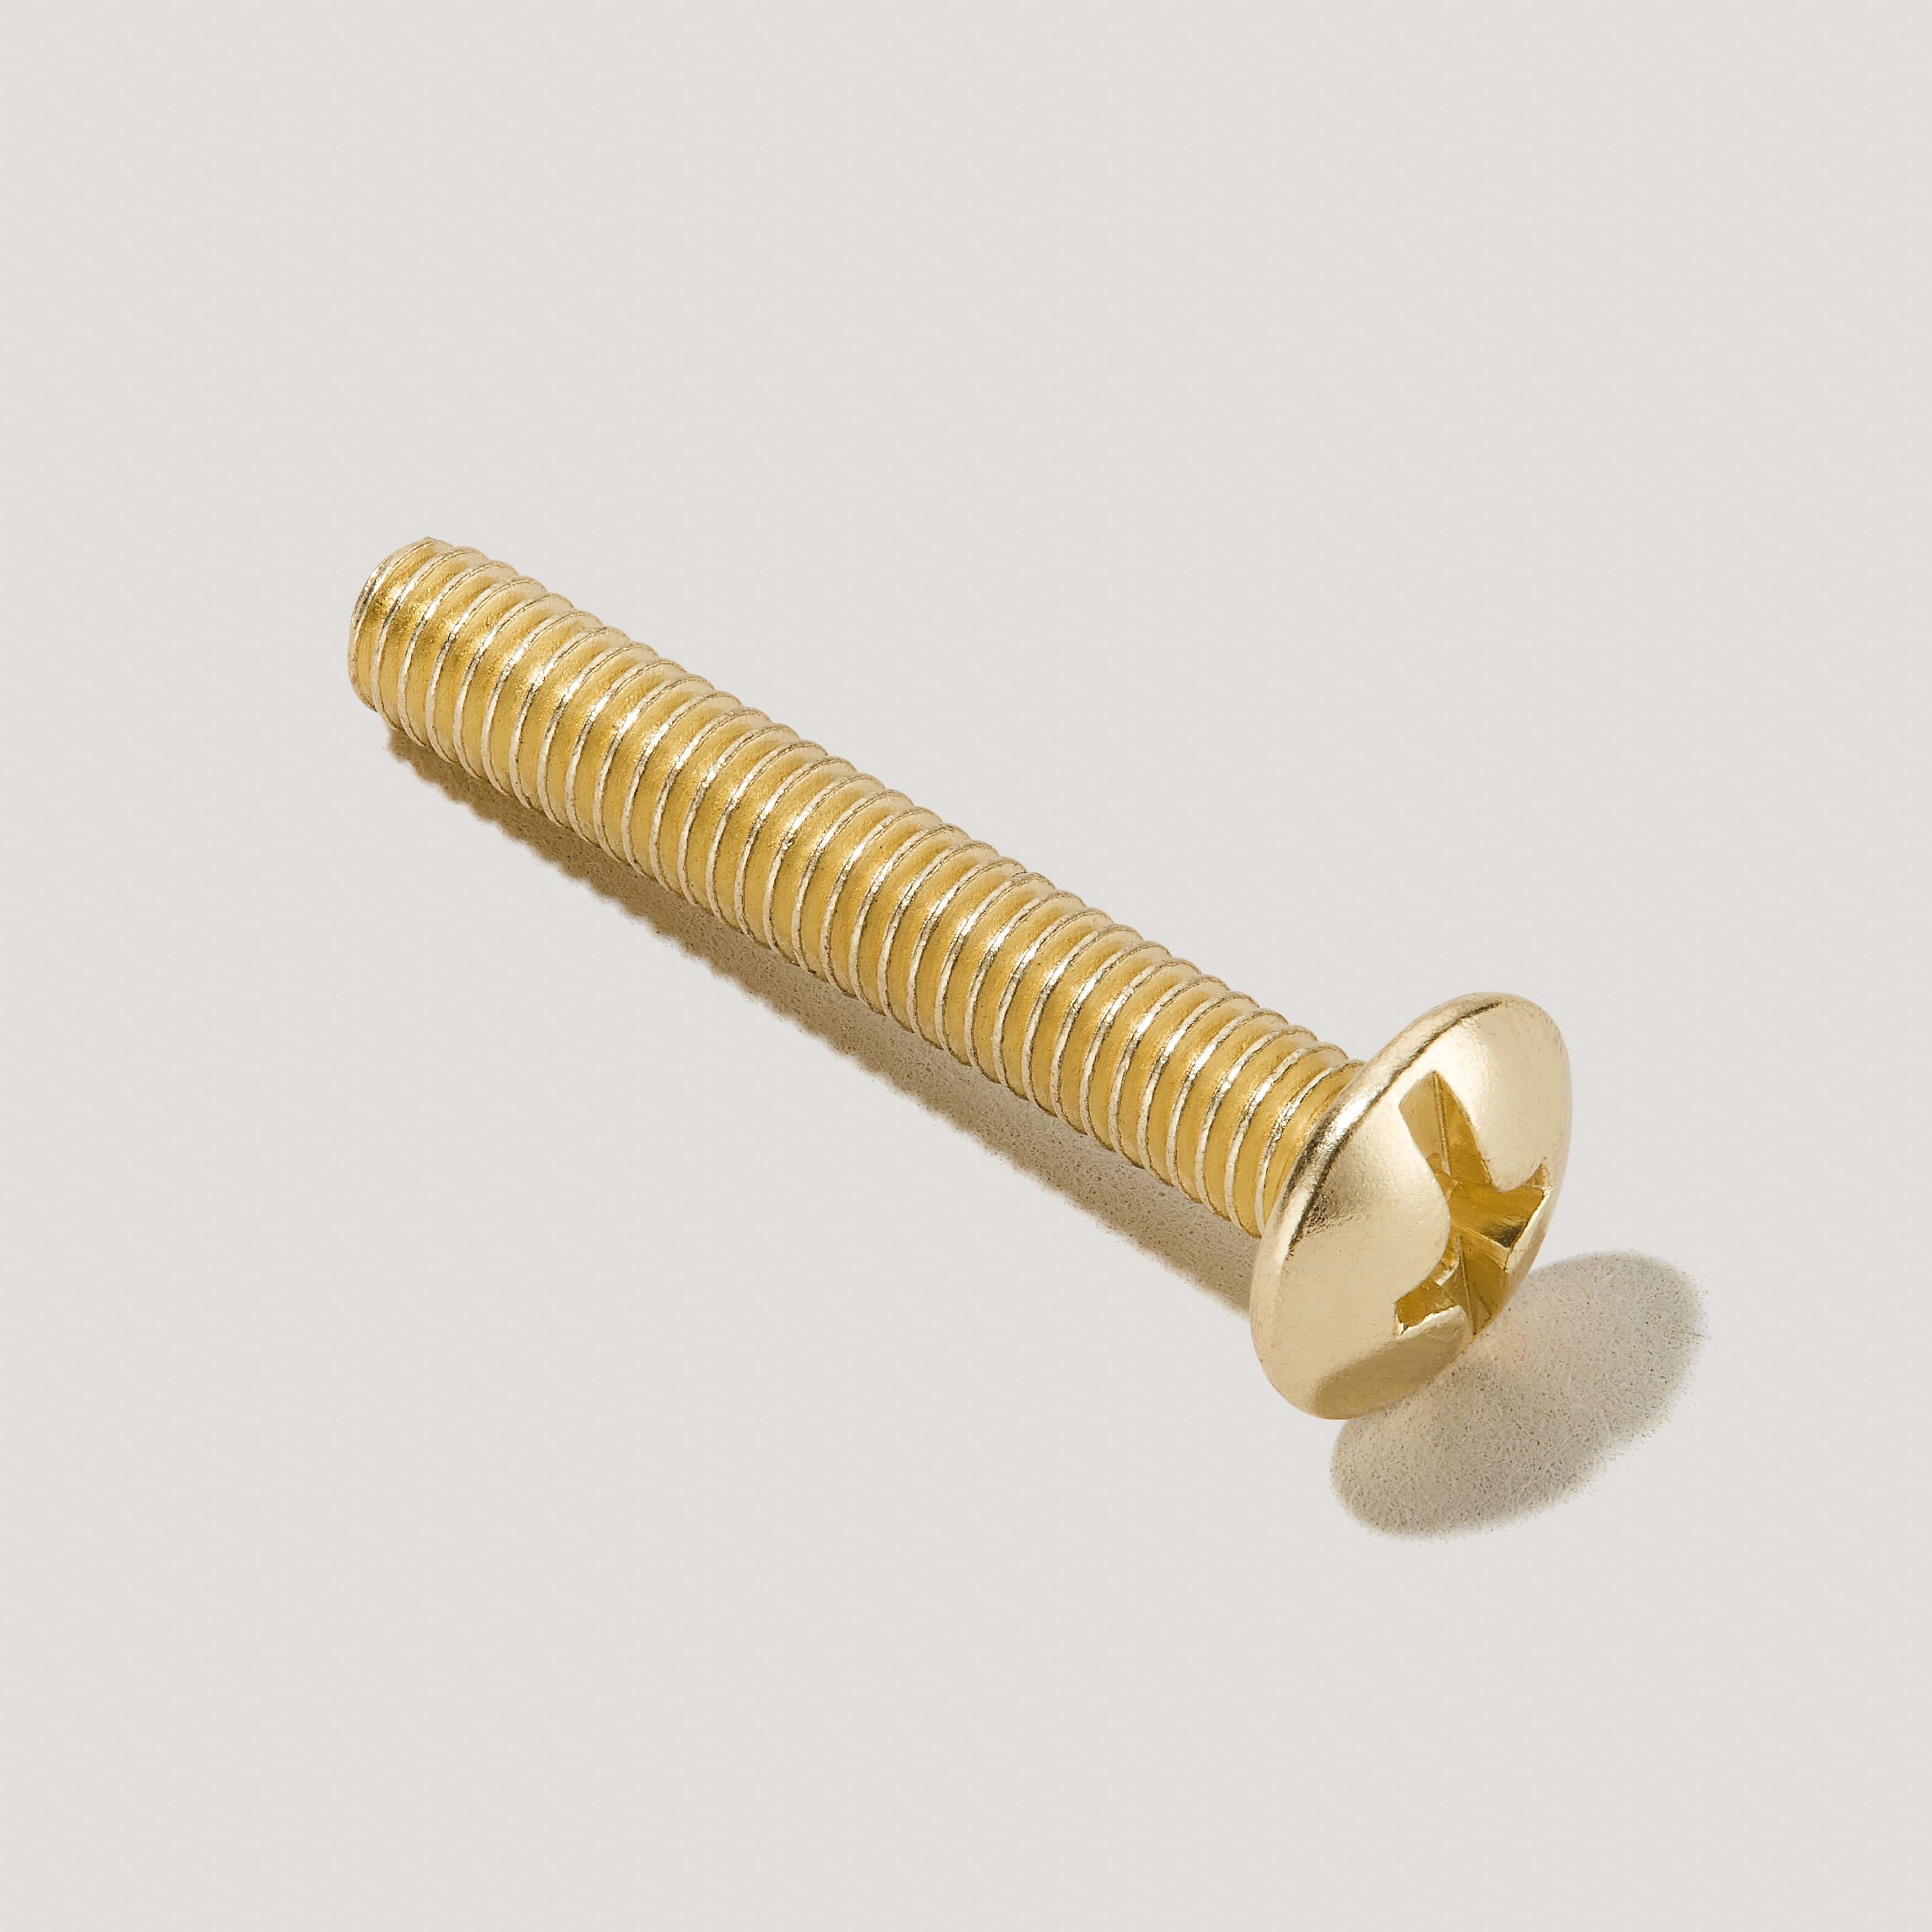 Plank Hardware Screws 25mm Brass M4 Screws - Assorted Lengths Available